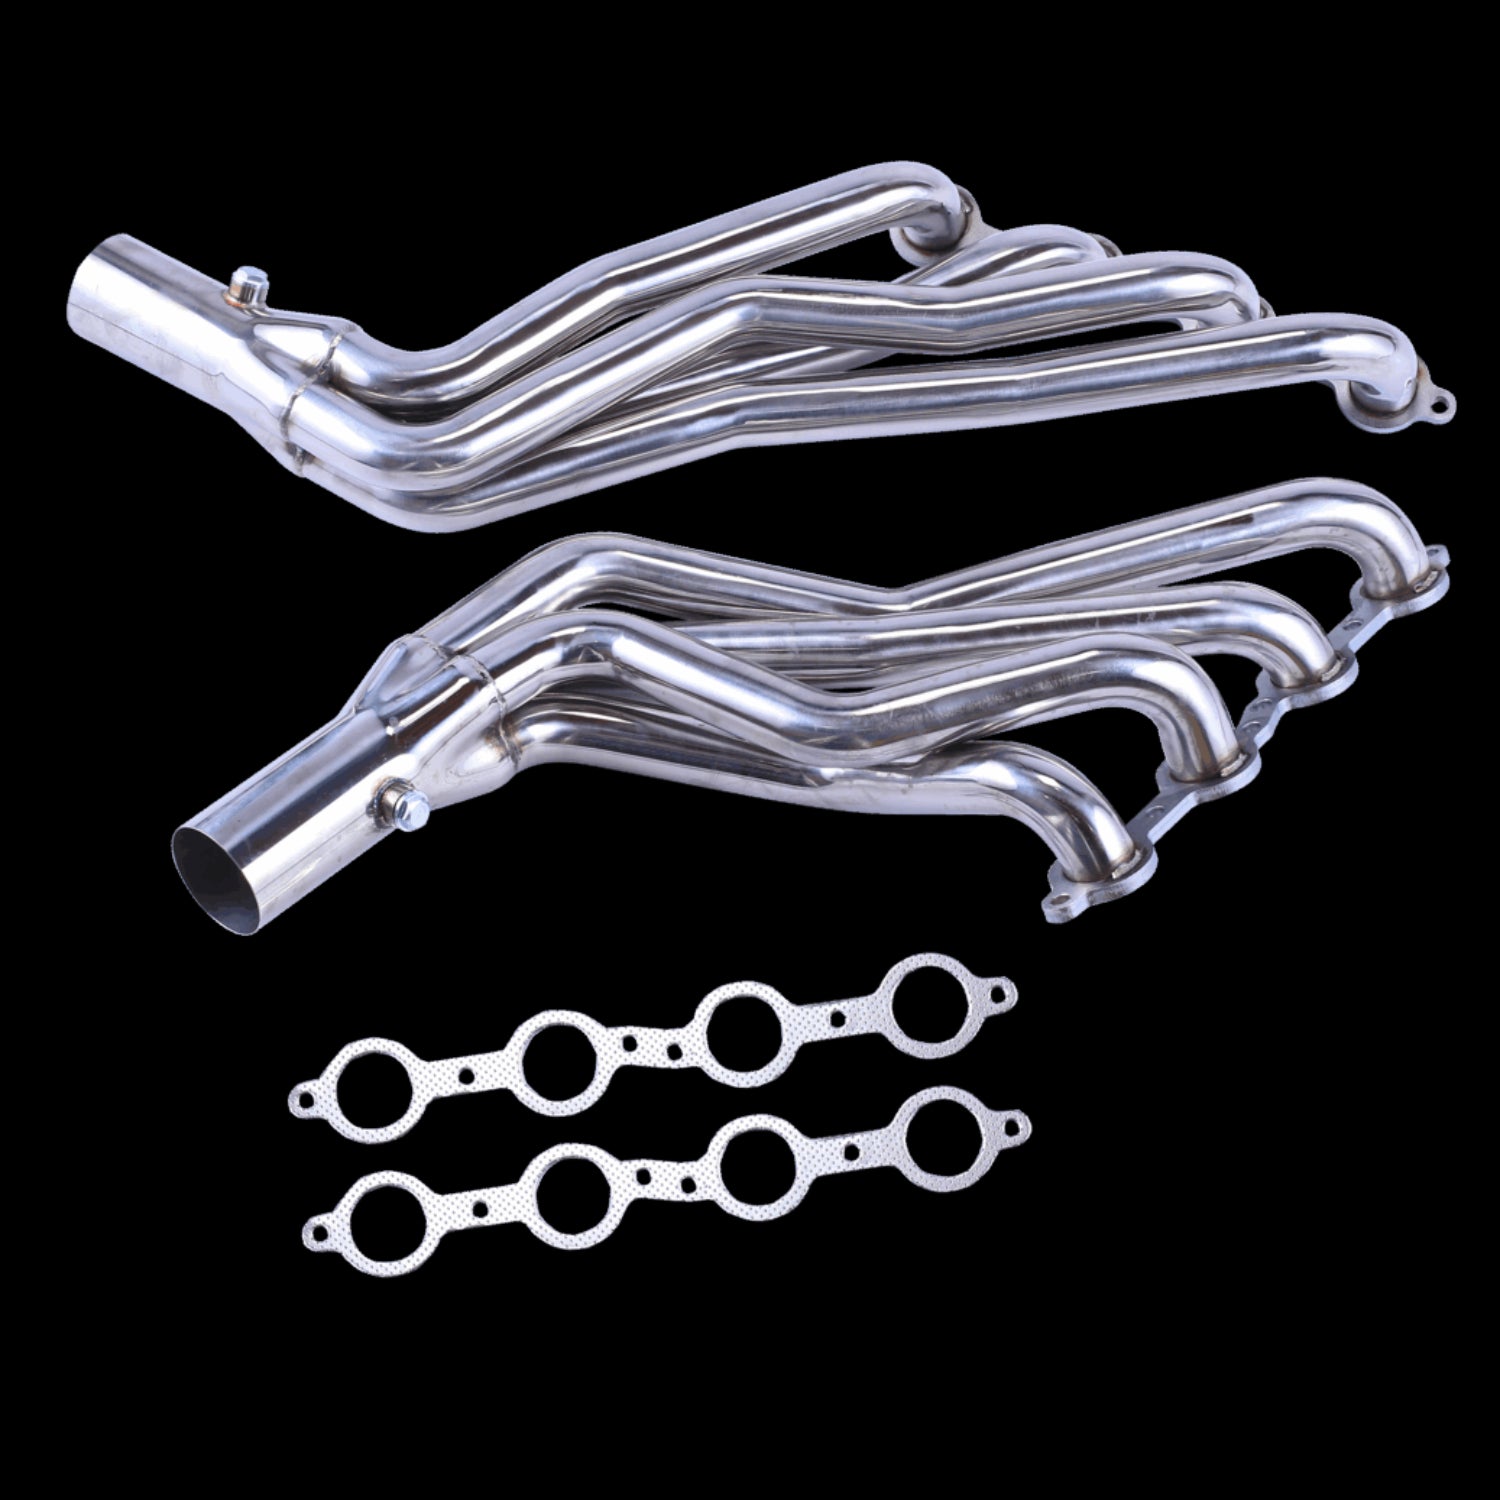 Exhaust Manifold Header for Chevy GMC 2007-2014 4.8L 5.3L 6.0L Long Tube Stainless Steel w/ Gaskets